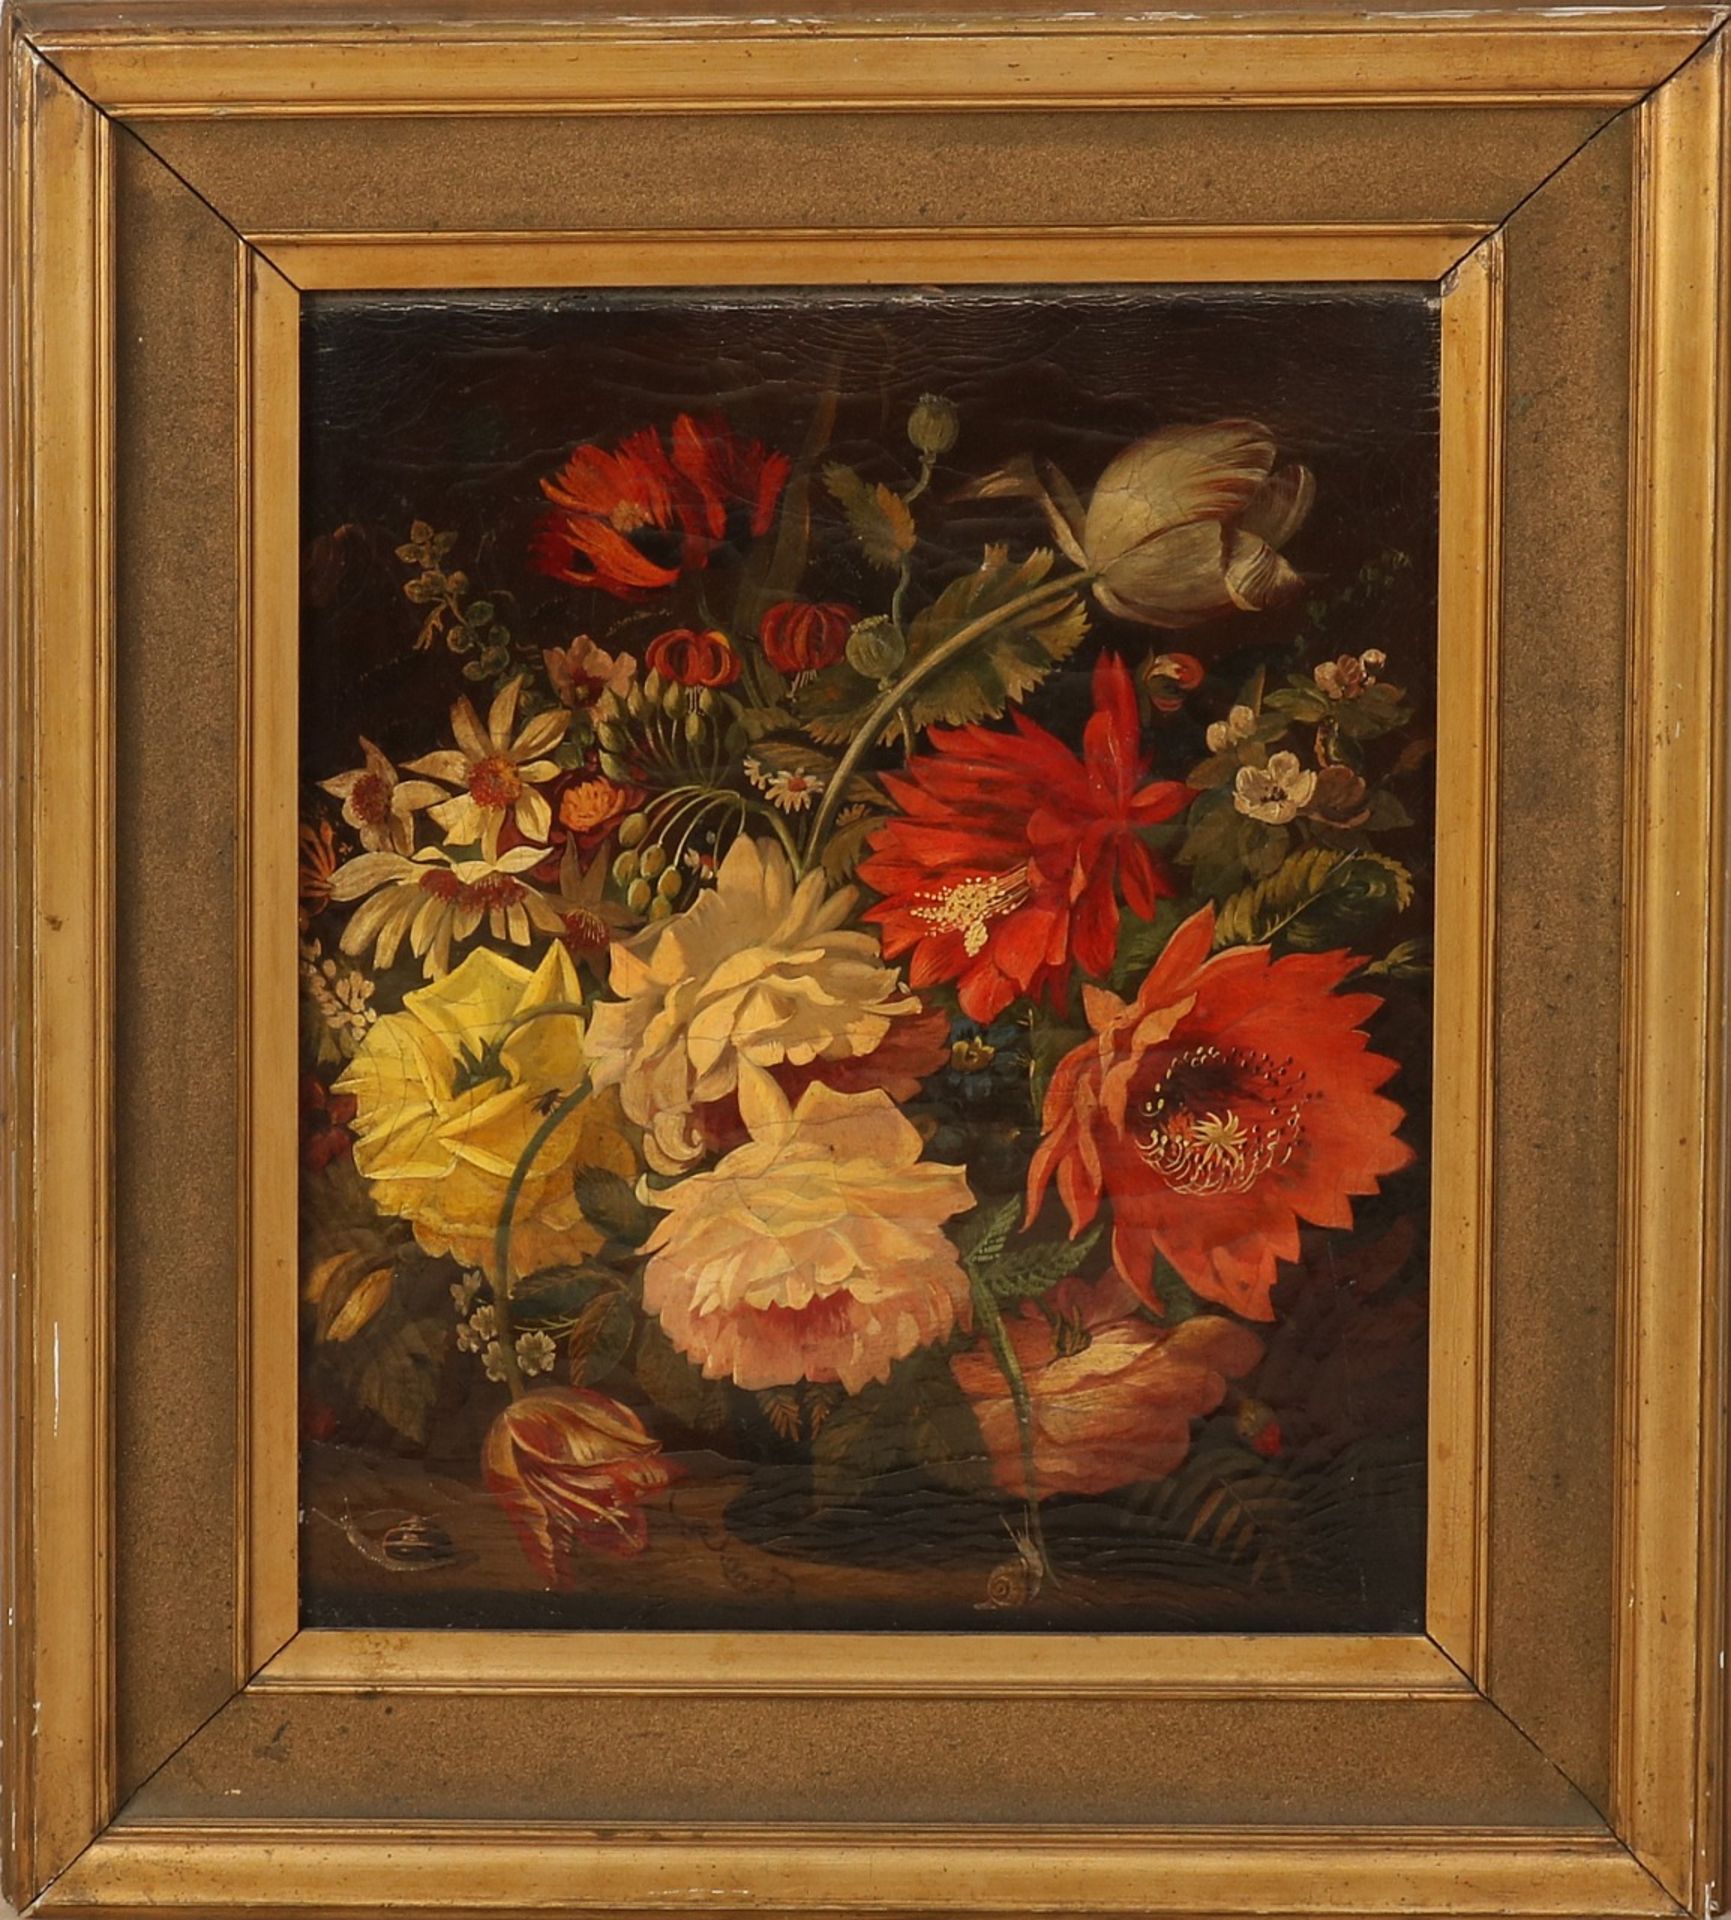 Reekers, Flower still life with insects